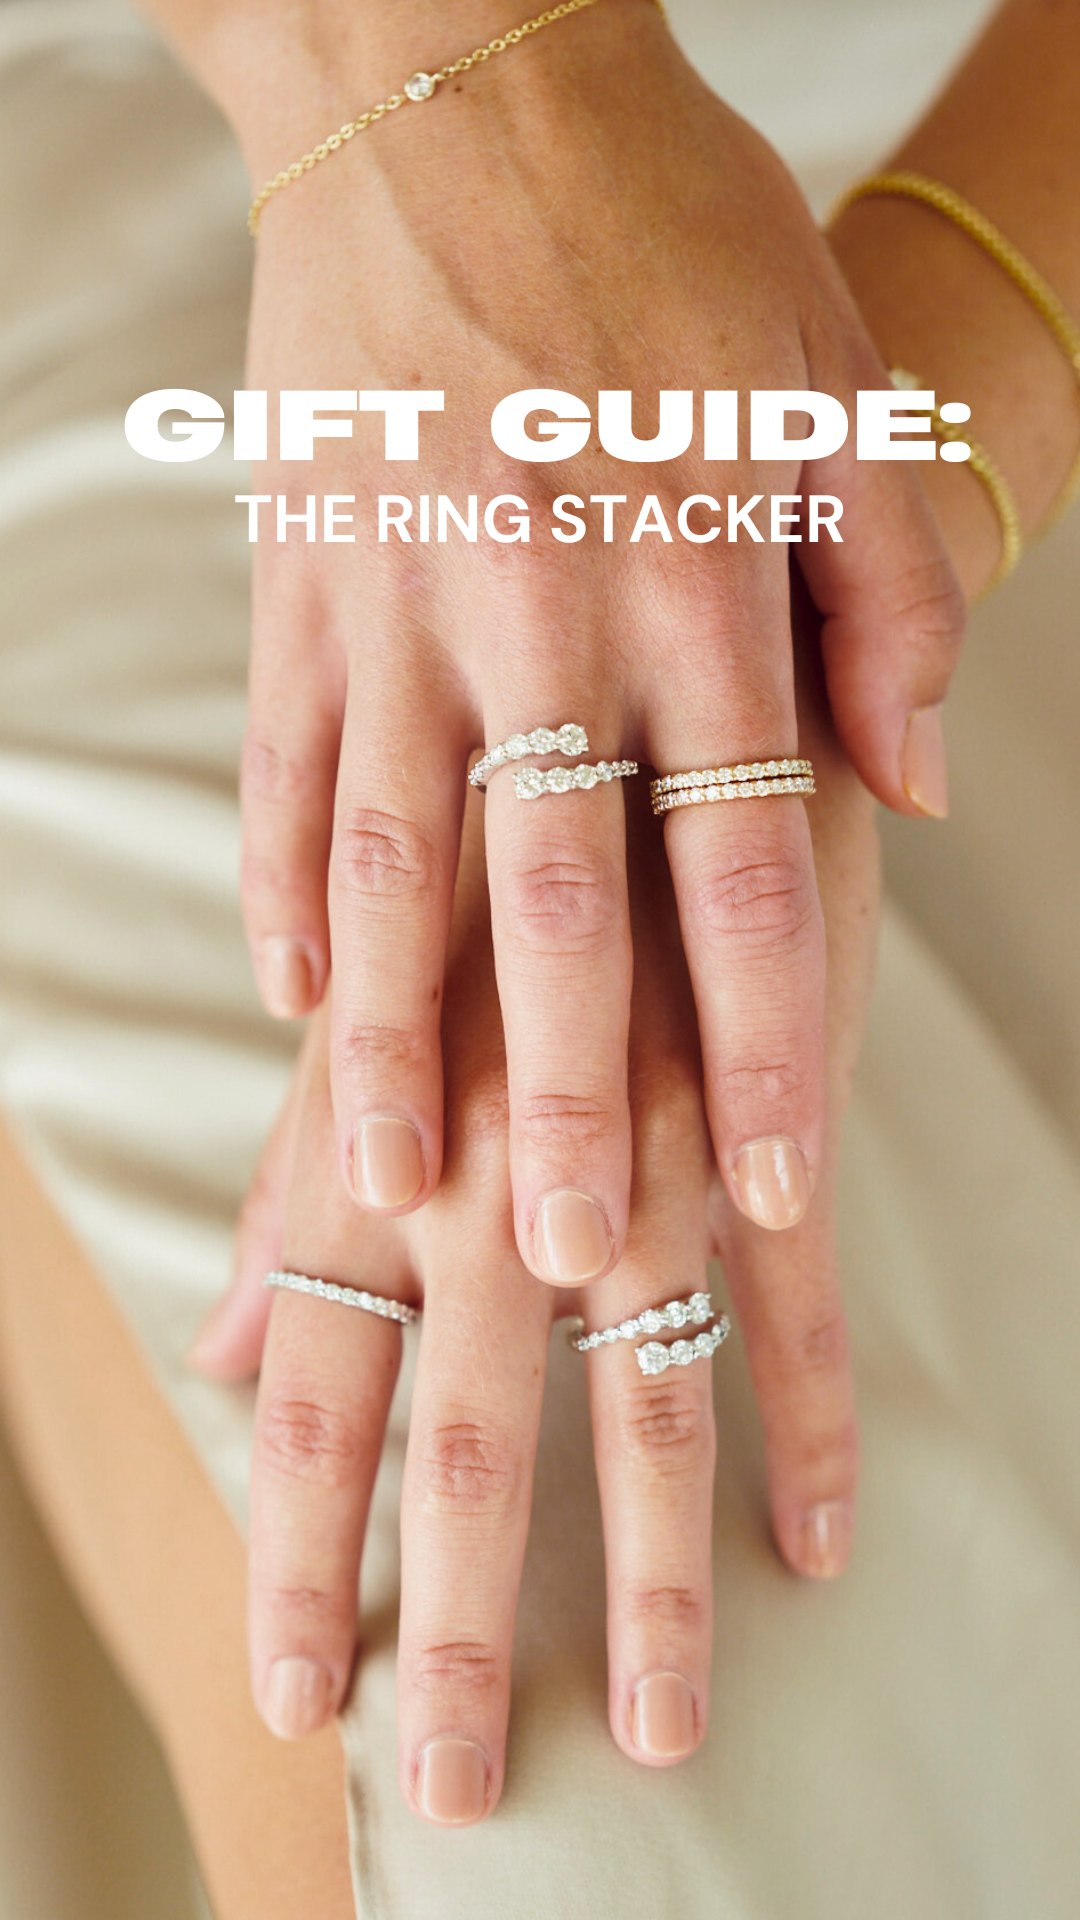 Gift Guide: The Ring Stacker